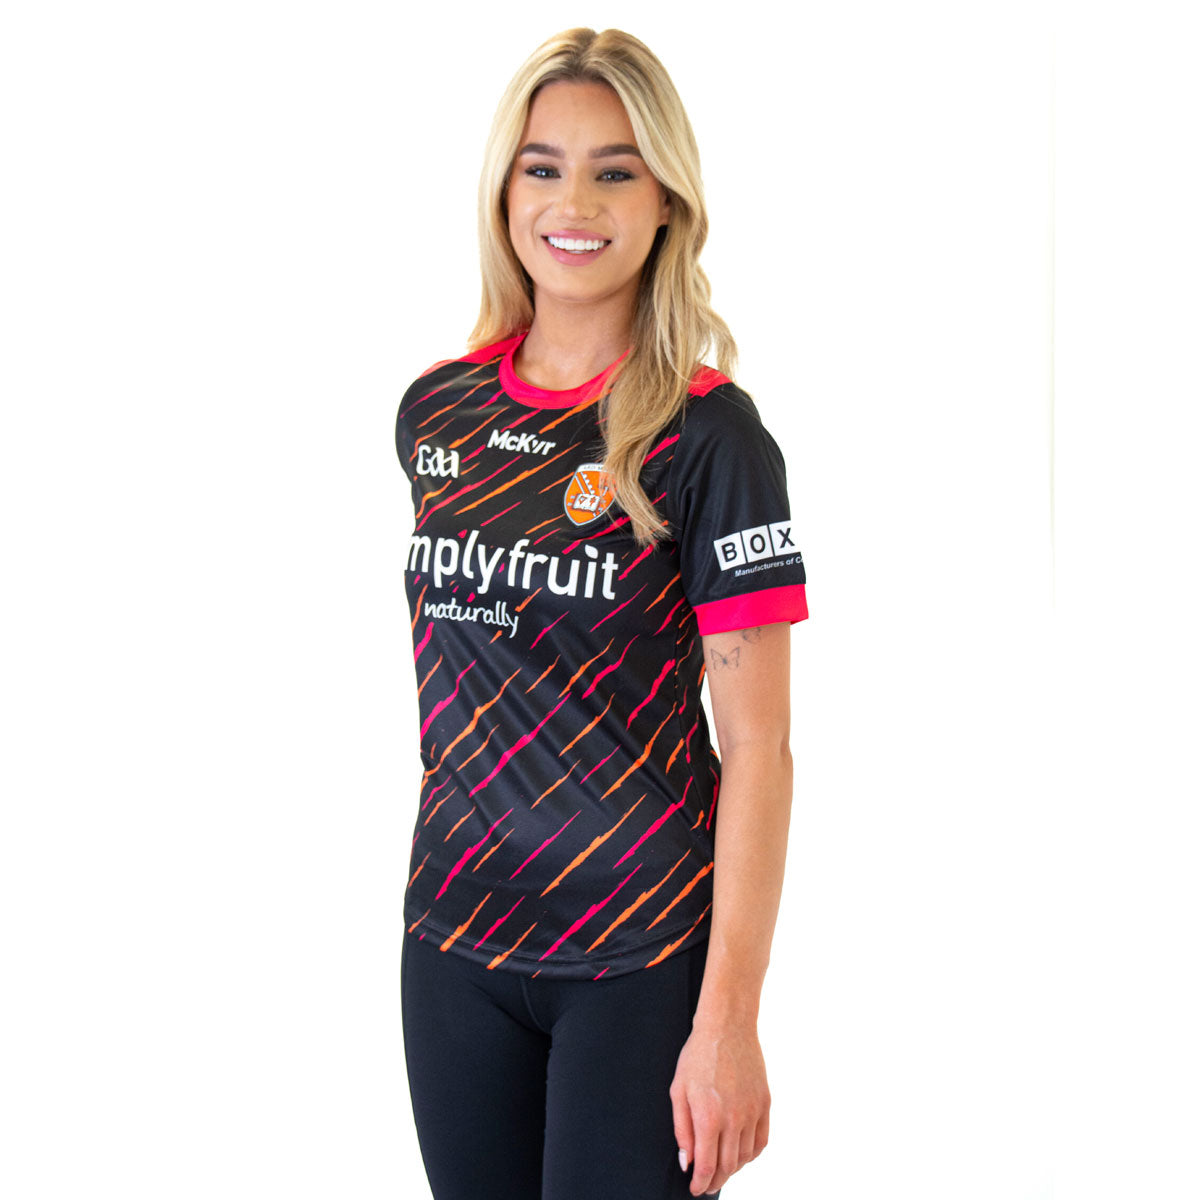 Mc Keever Armagh GAA Official Pulse Training Jersey - Womens - Black/Pink/Orange